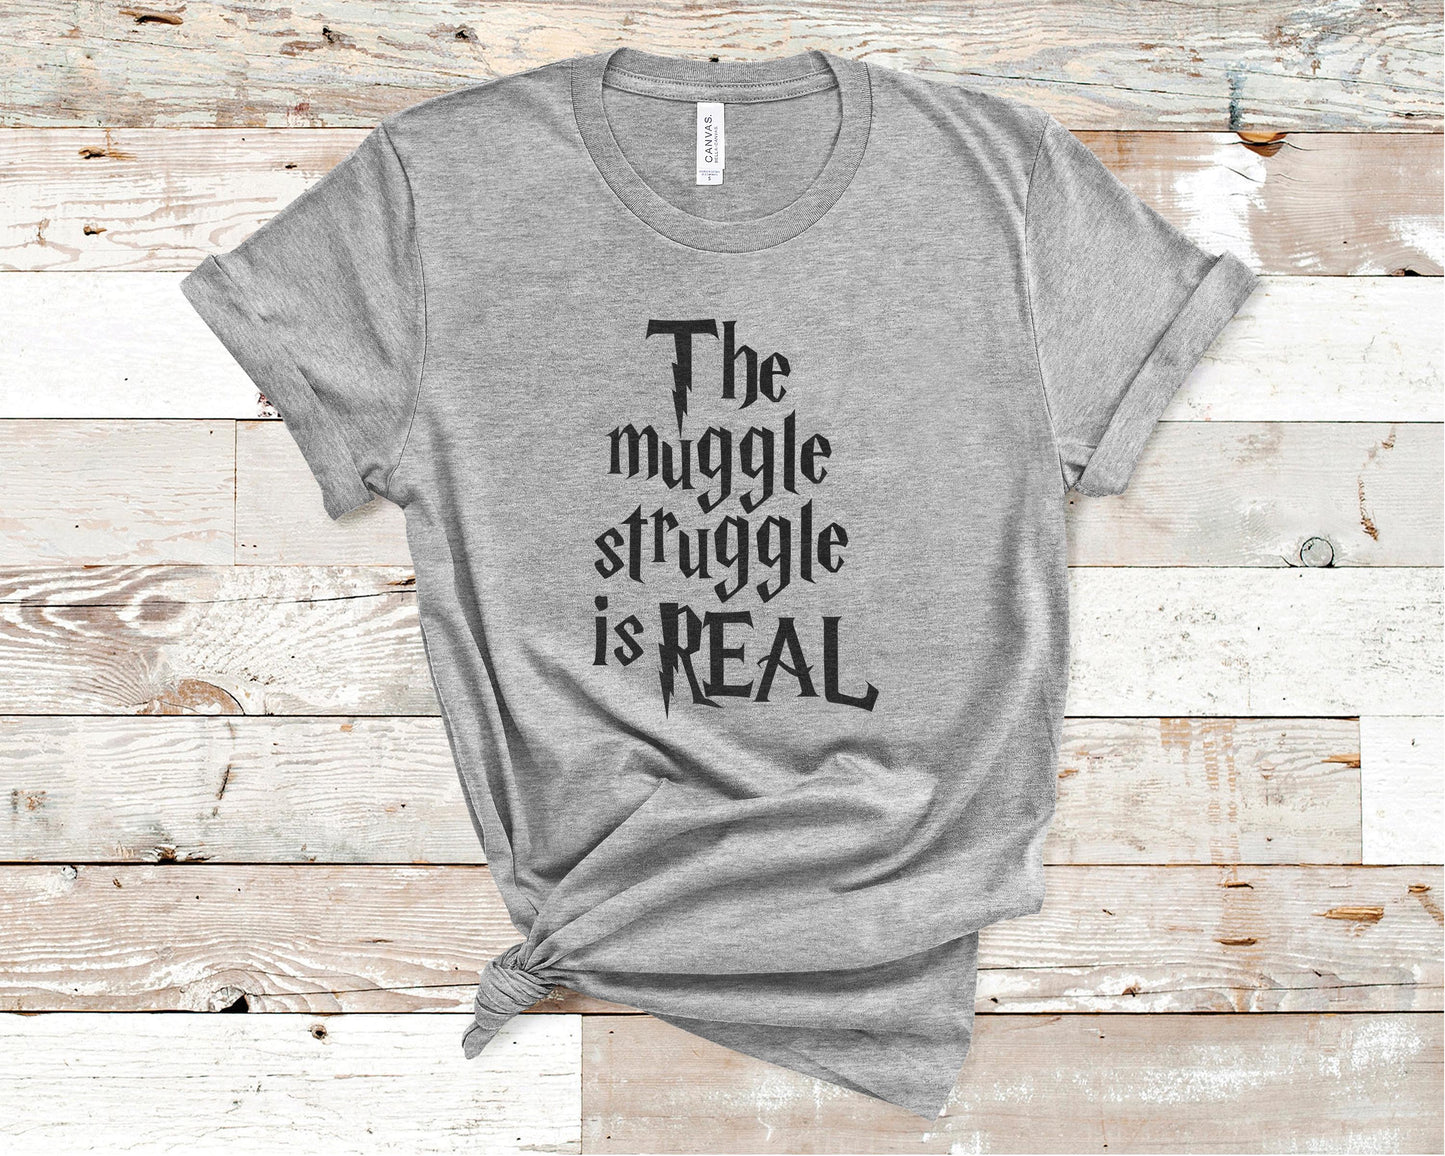 The Muggle Struggle Is Real - Harry Potter